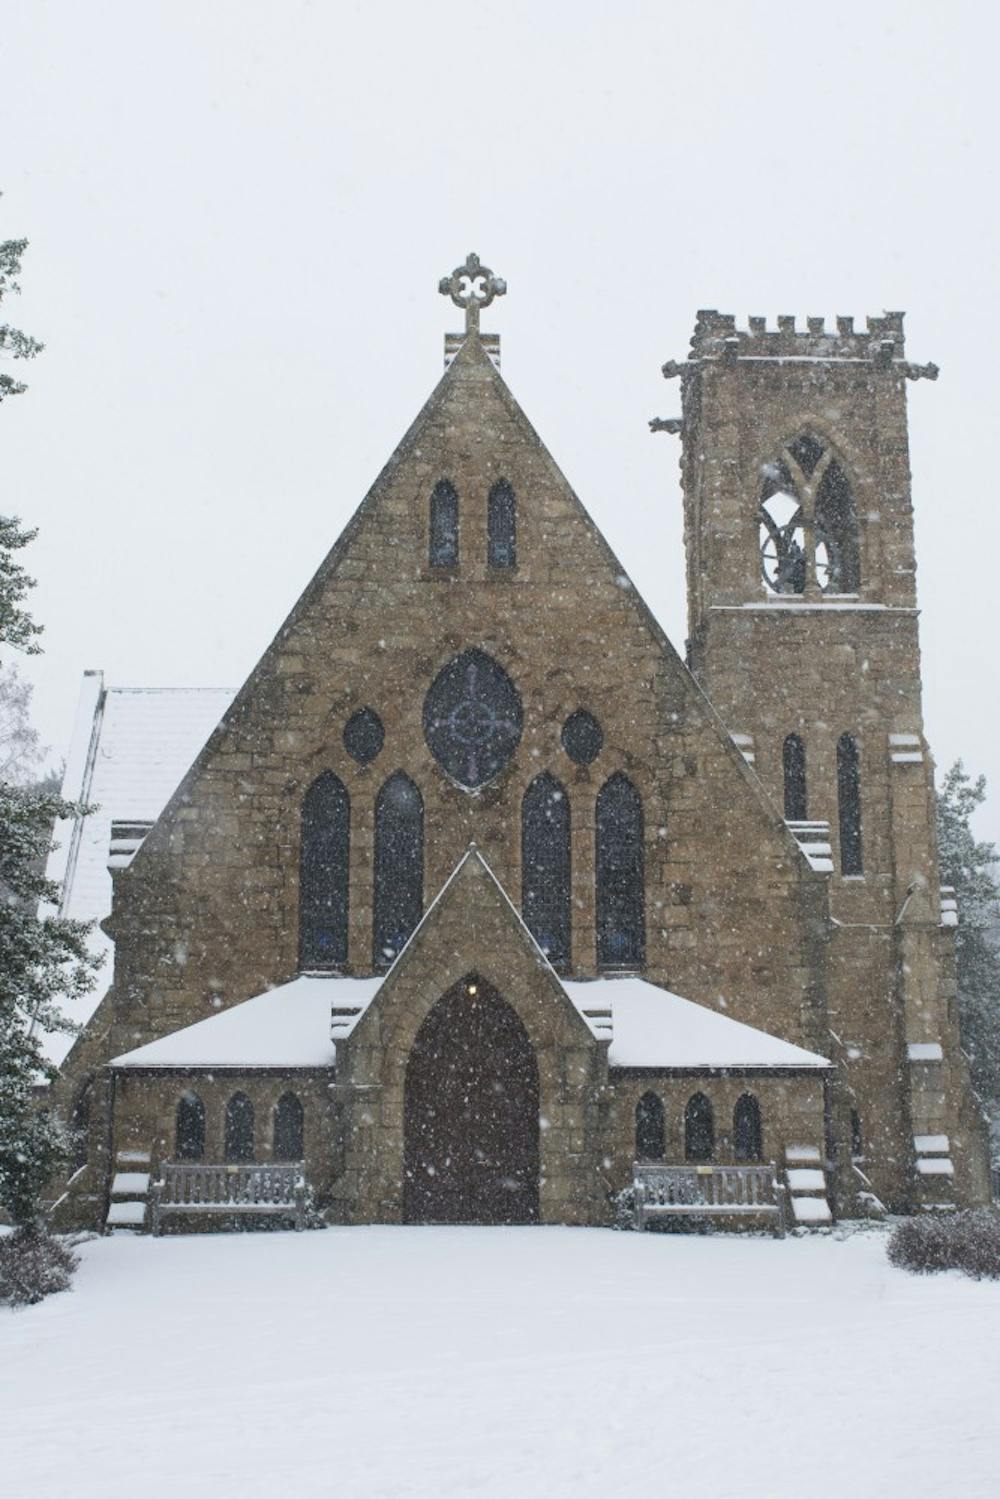 In 2015, 63 weddings were held in the Chapel &mdash; nearly half of the number held there in 2008.